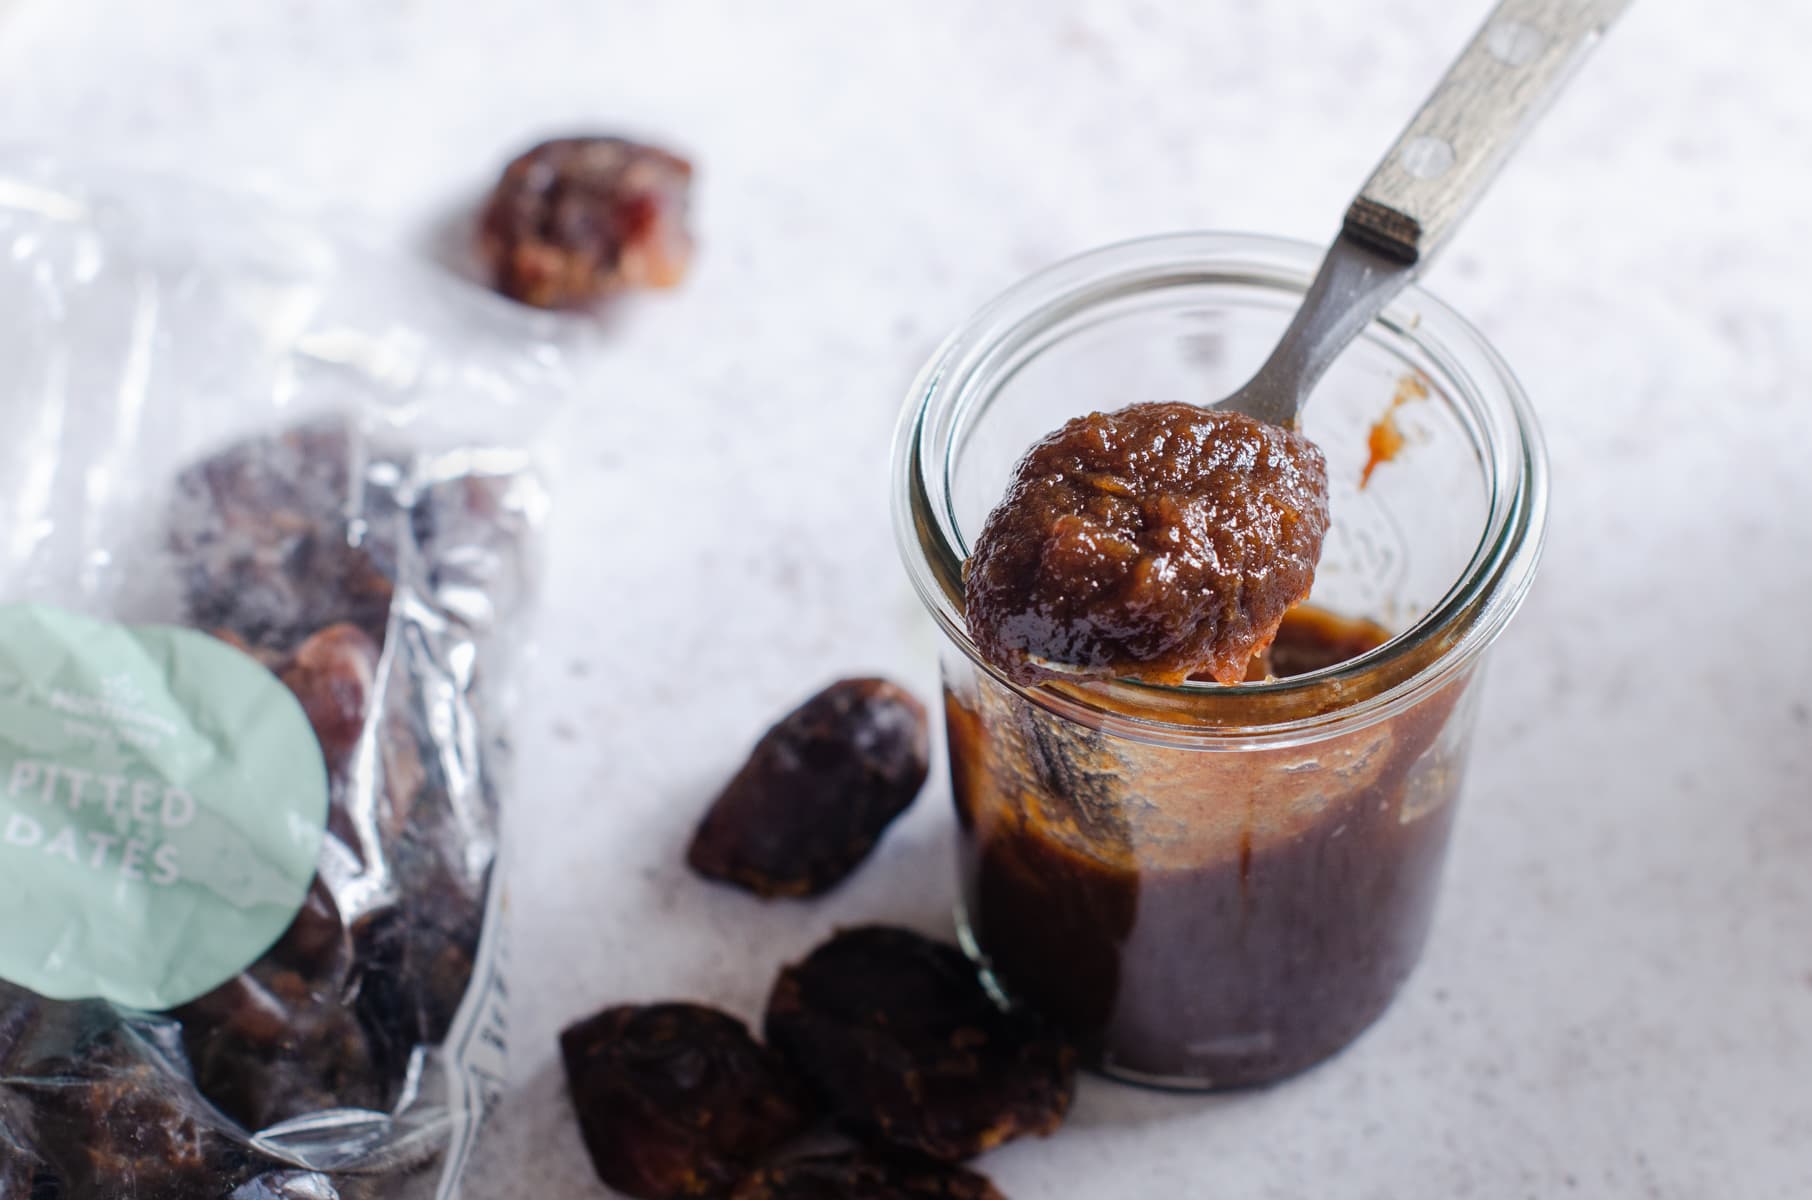 A glass jar of fresh made date and tamarind chutney with some dates scattered.